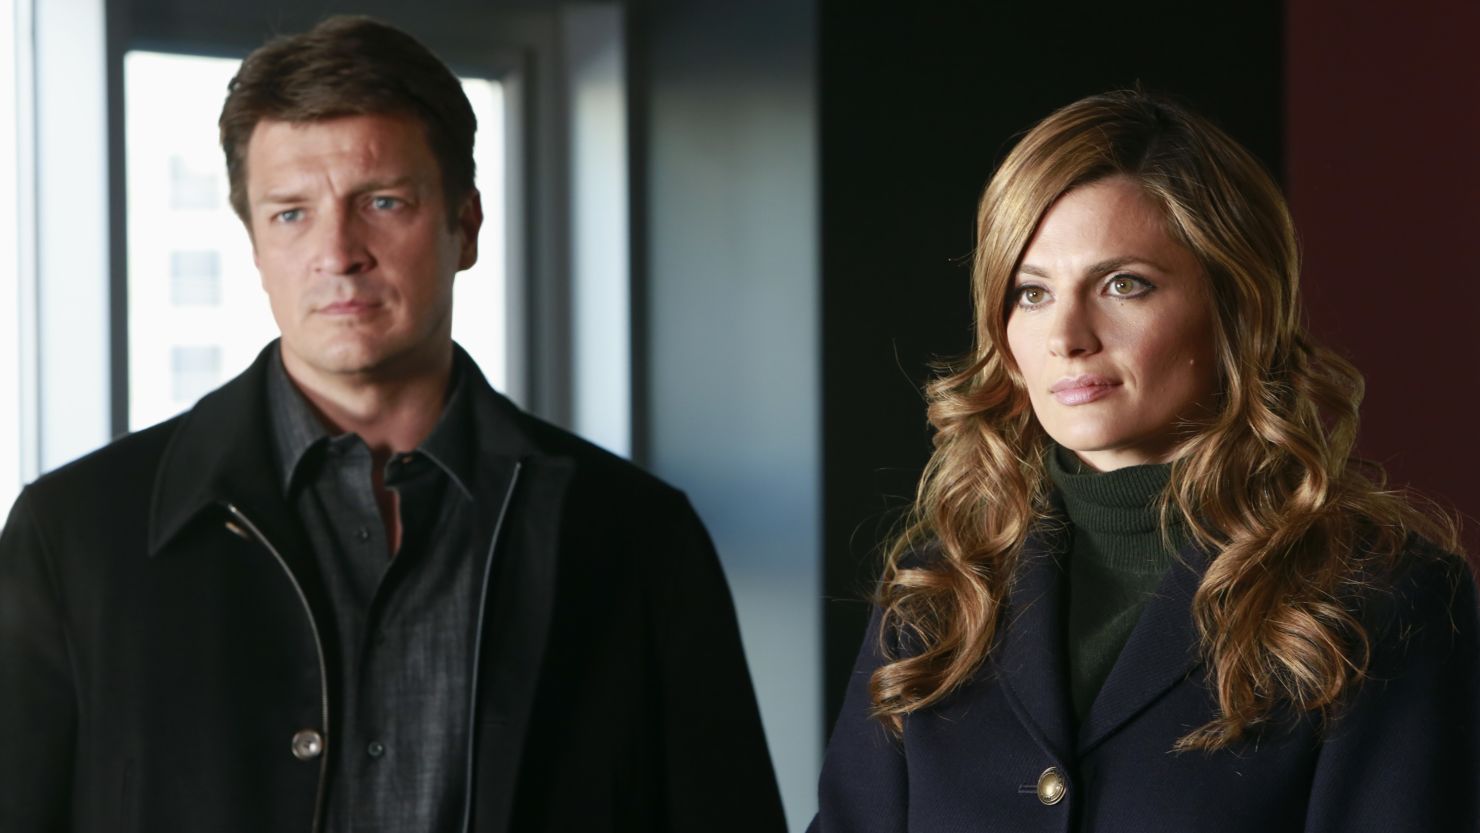 Nathan Fillion and Stana Katic star on ABC's hit series "Castle."